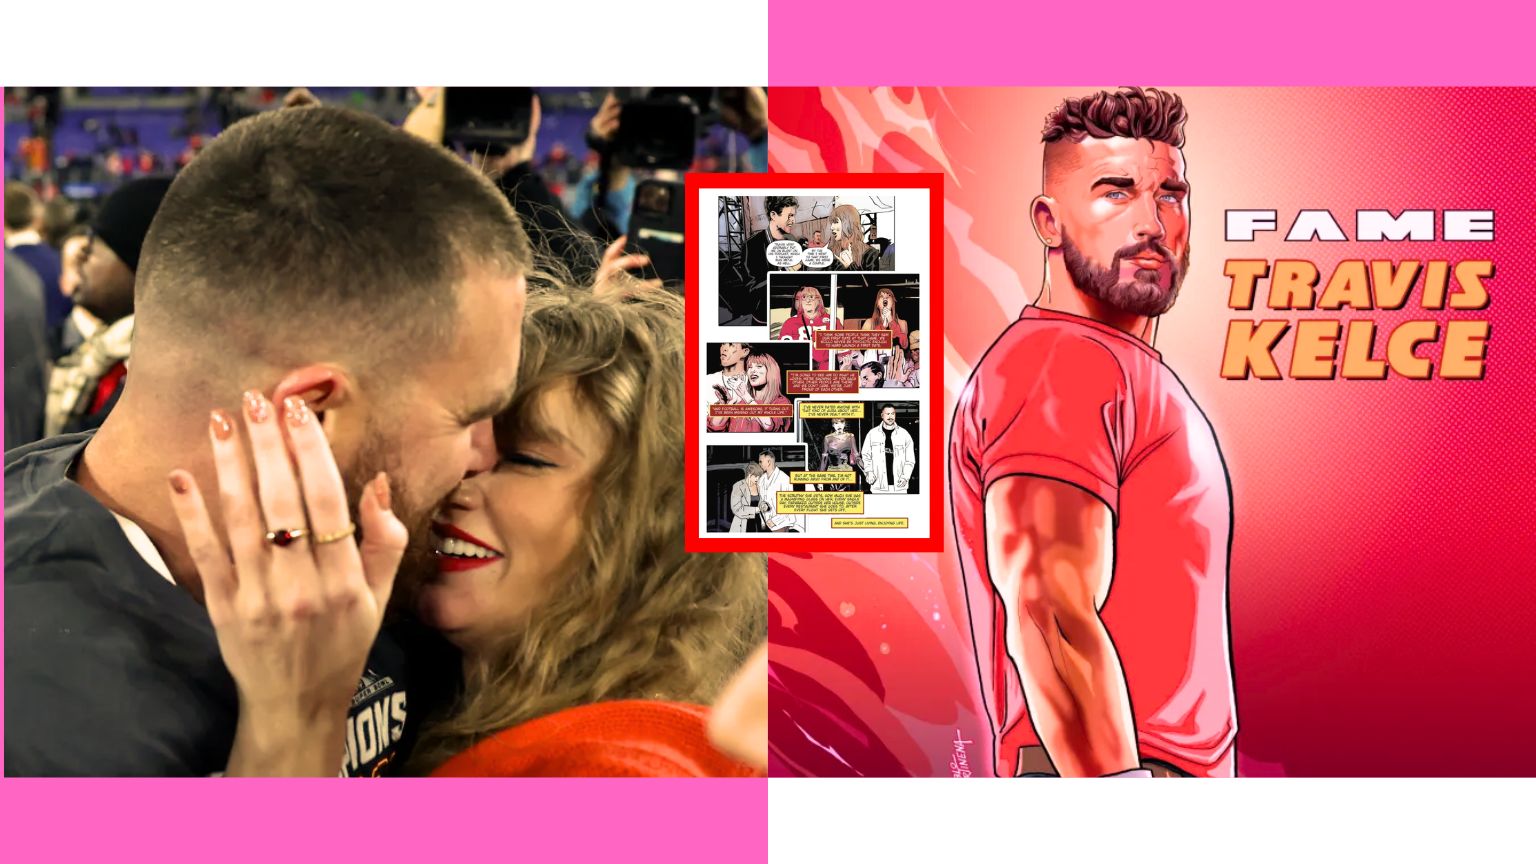 Taylor Swift and Travis Kelce's Romance Takes Center Stage in a Comic Book Celebrating the NFL Star's Extraordinary Life